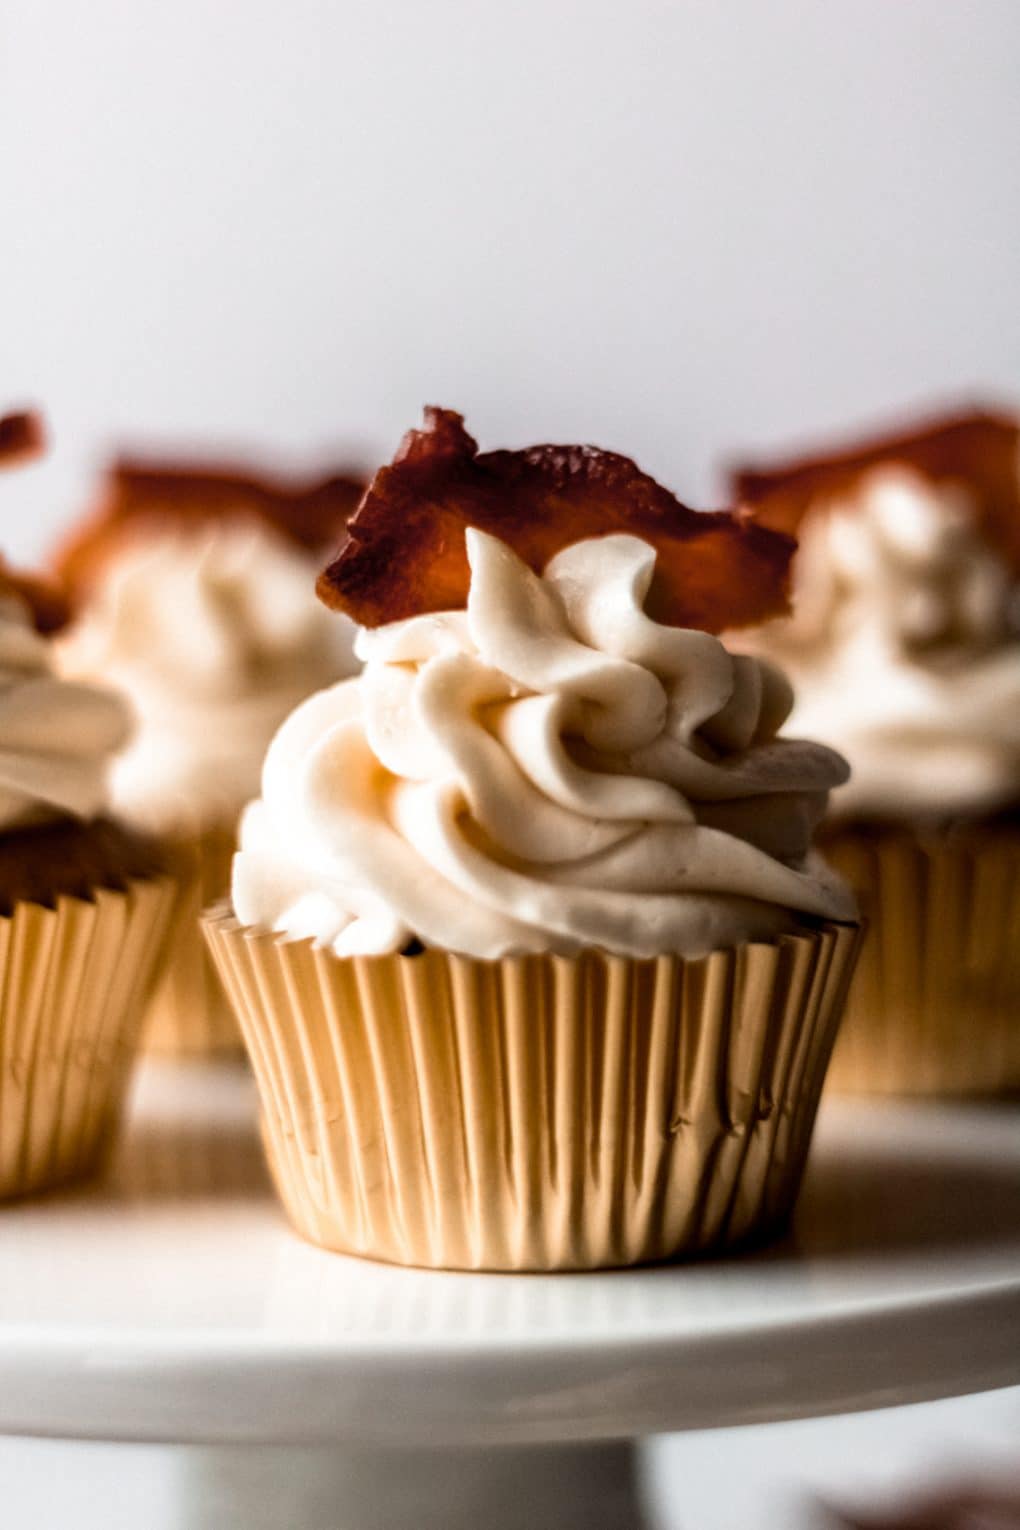 A close up shot of one maple bacon spice cupcake on a cupcake stand with additional cupcakes in the background